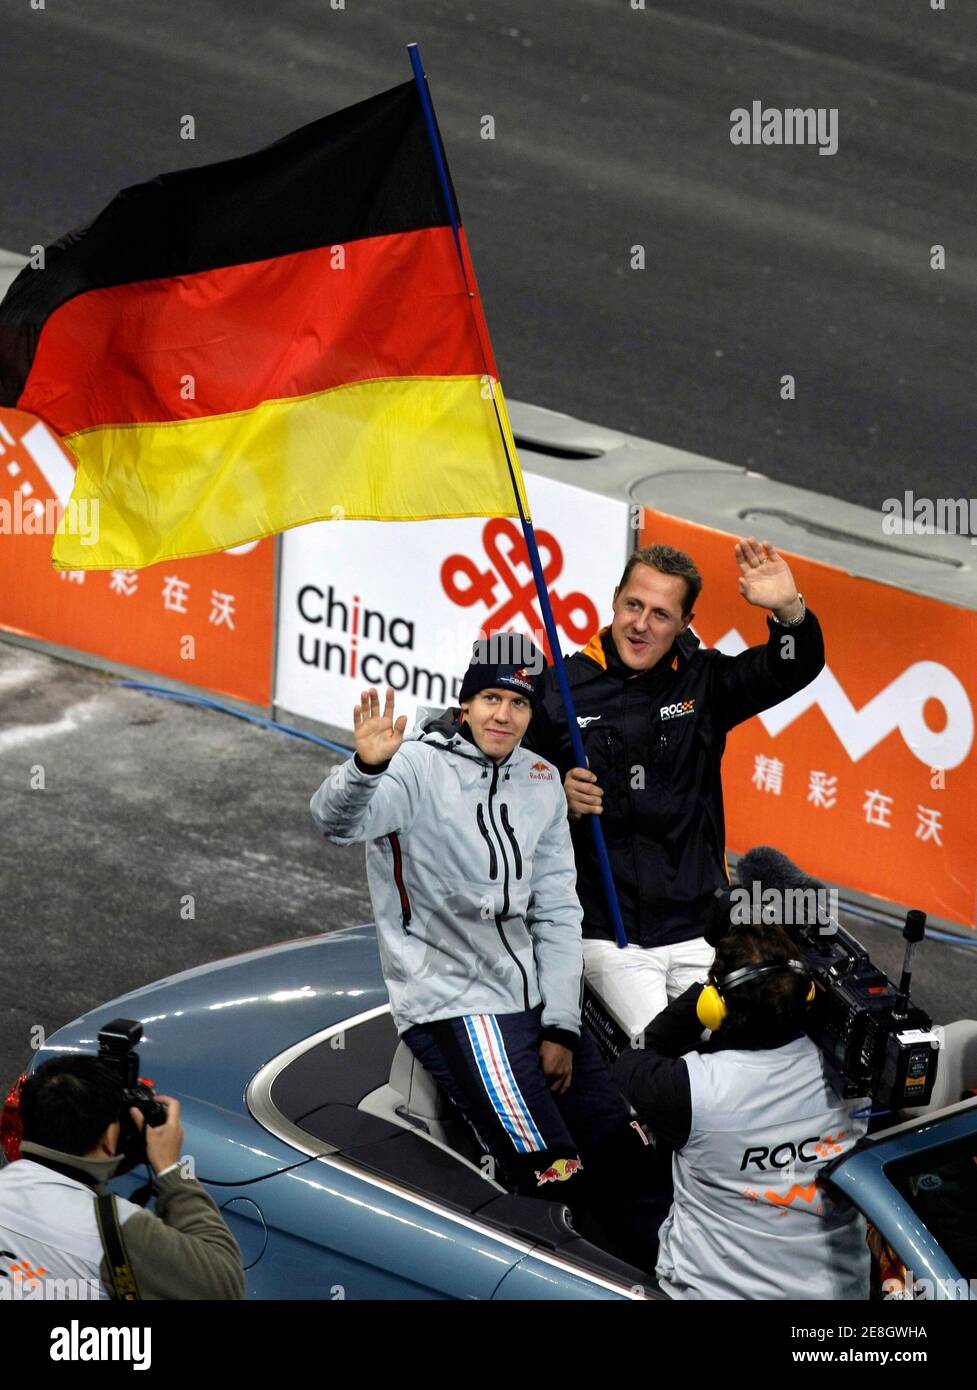 Team Germany's Michael Schumacher (R) and Formula One Red Bull driver Sebastian Vettel arrive for the Race of Champions (ROC) Nations Cup at the 'Bird's Nest' National Stadium in Beijing November 3, 2009. REUTERS/Jason Lee(CHINA SPORT MOTOR RACING) Stock Photo